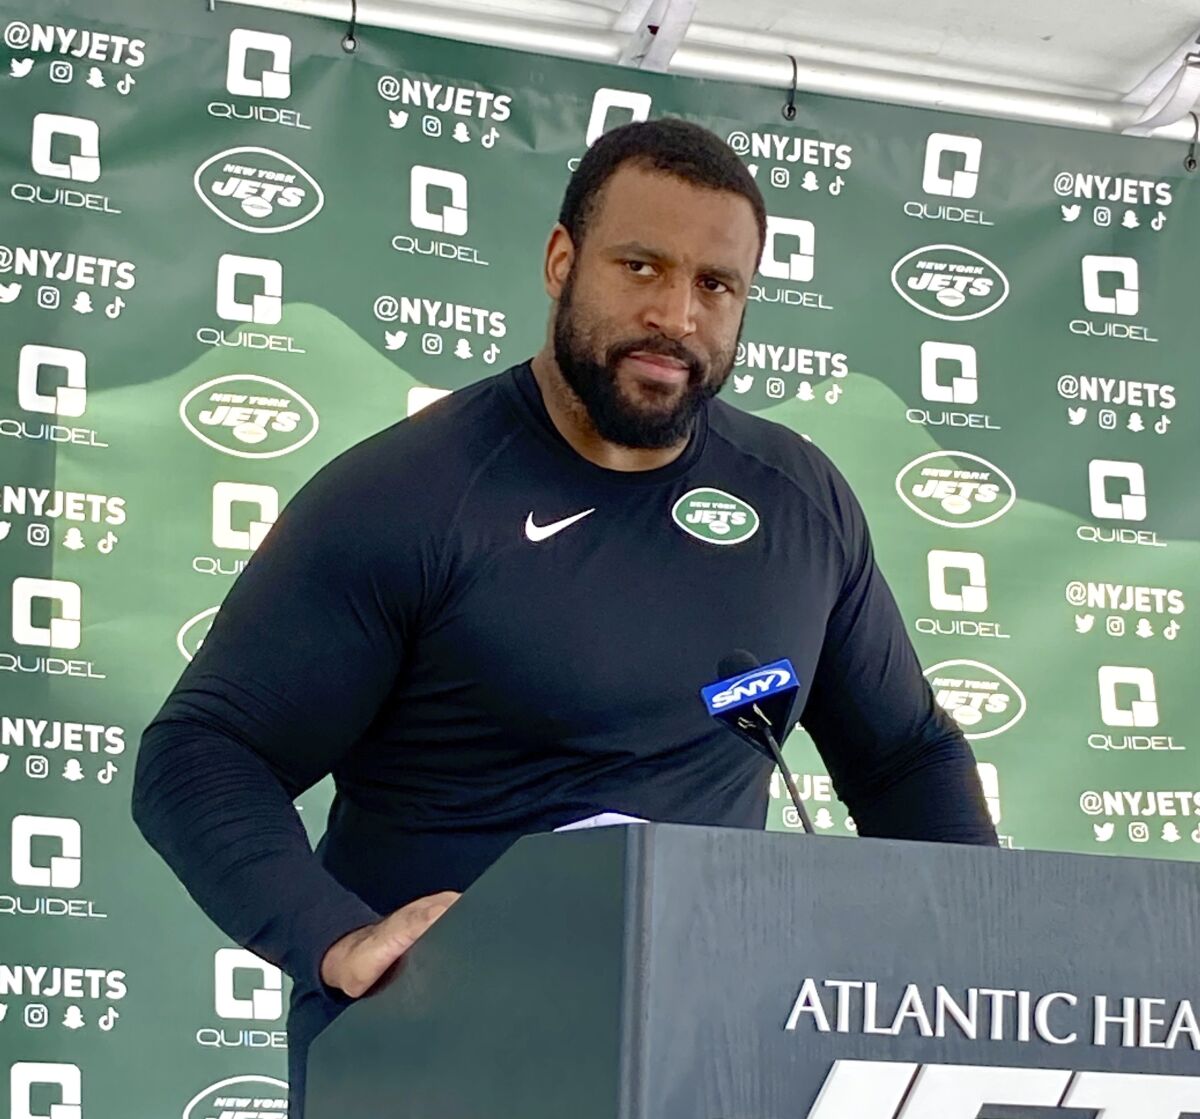 New York Jets offensive tackle Duane Brown speaks to reporters at the NFL football team training facility in Florham Park, N.J., Tuesday, Aug. 16, 2022. Brown signed a two-year contract with the New York Jets to play left tackle -- and at a high level. The offensive lineman, who turns 37 on Aug. 30, is excited to continue his career.(AP Photo/Dennis Waszak Jr.)